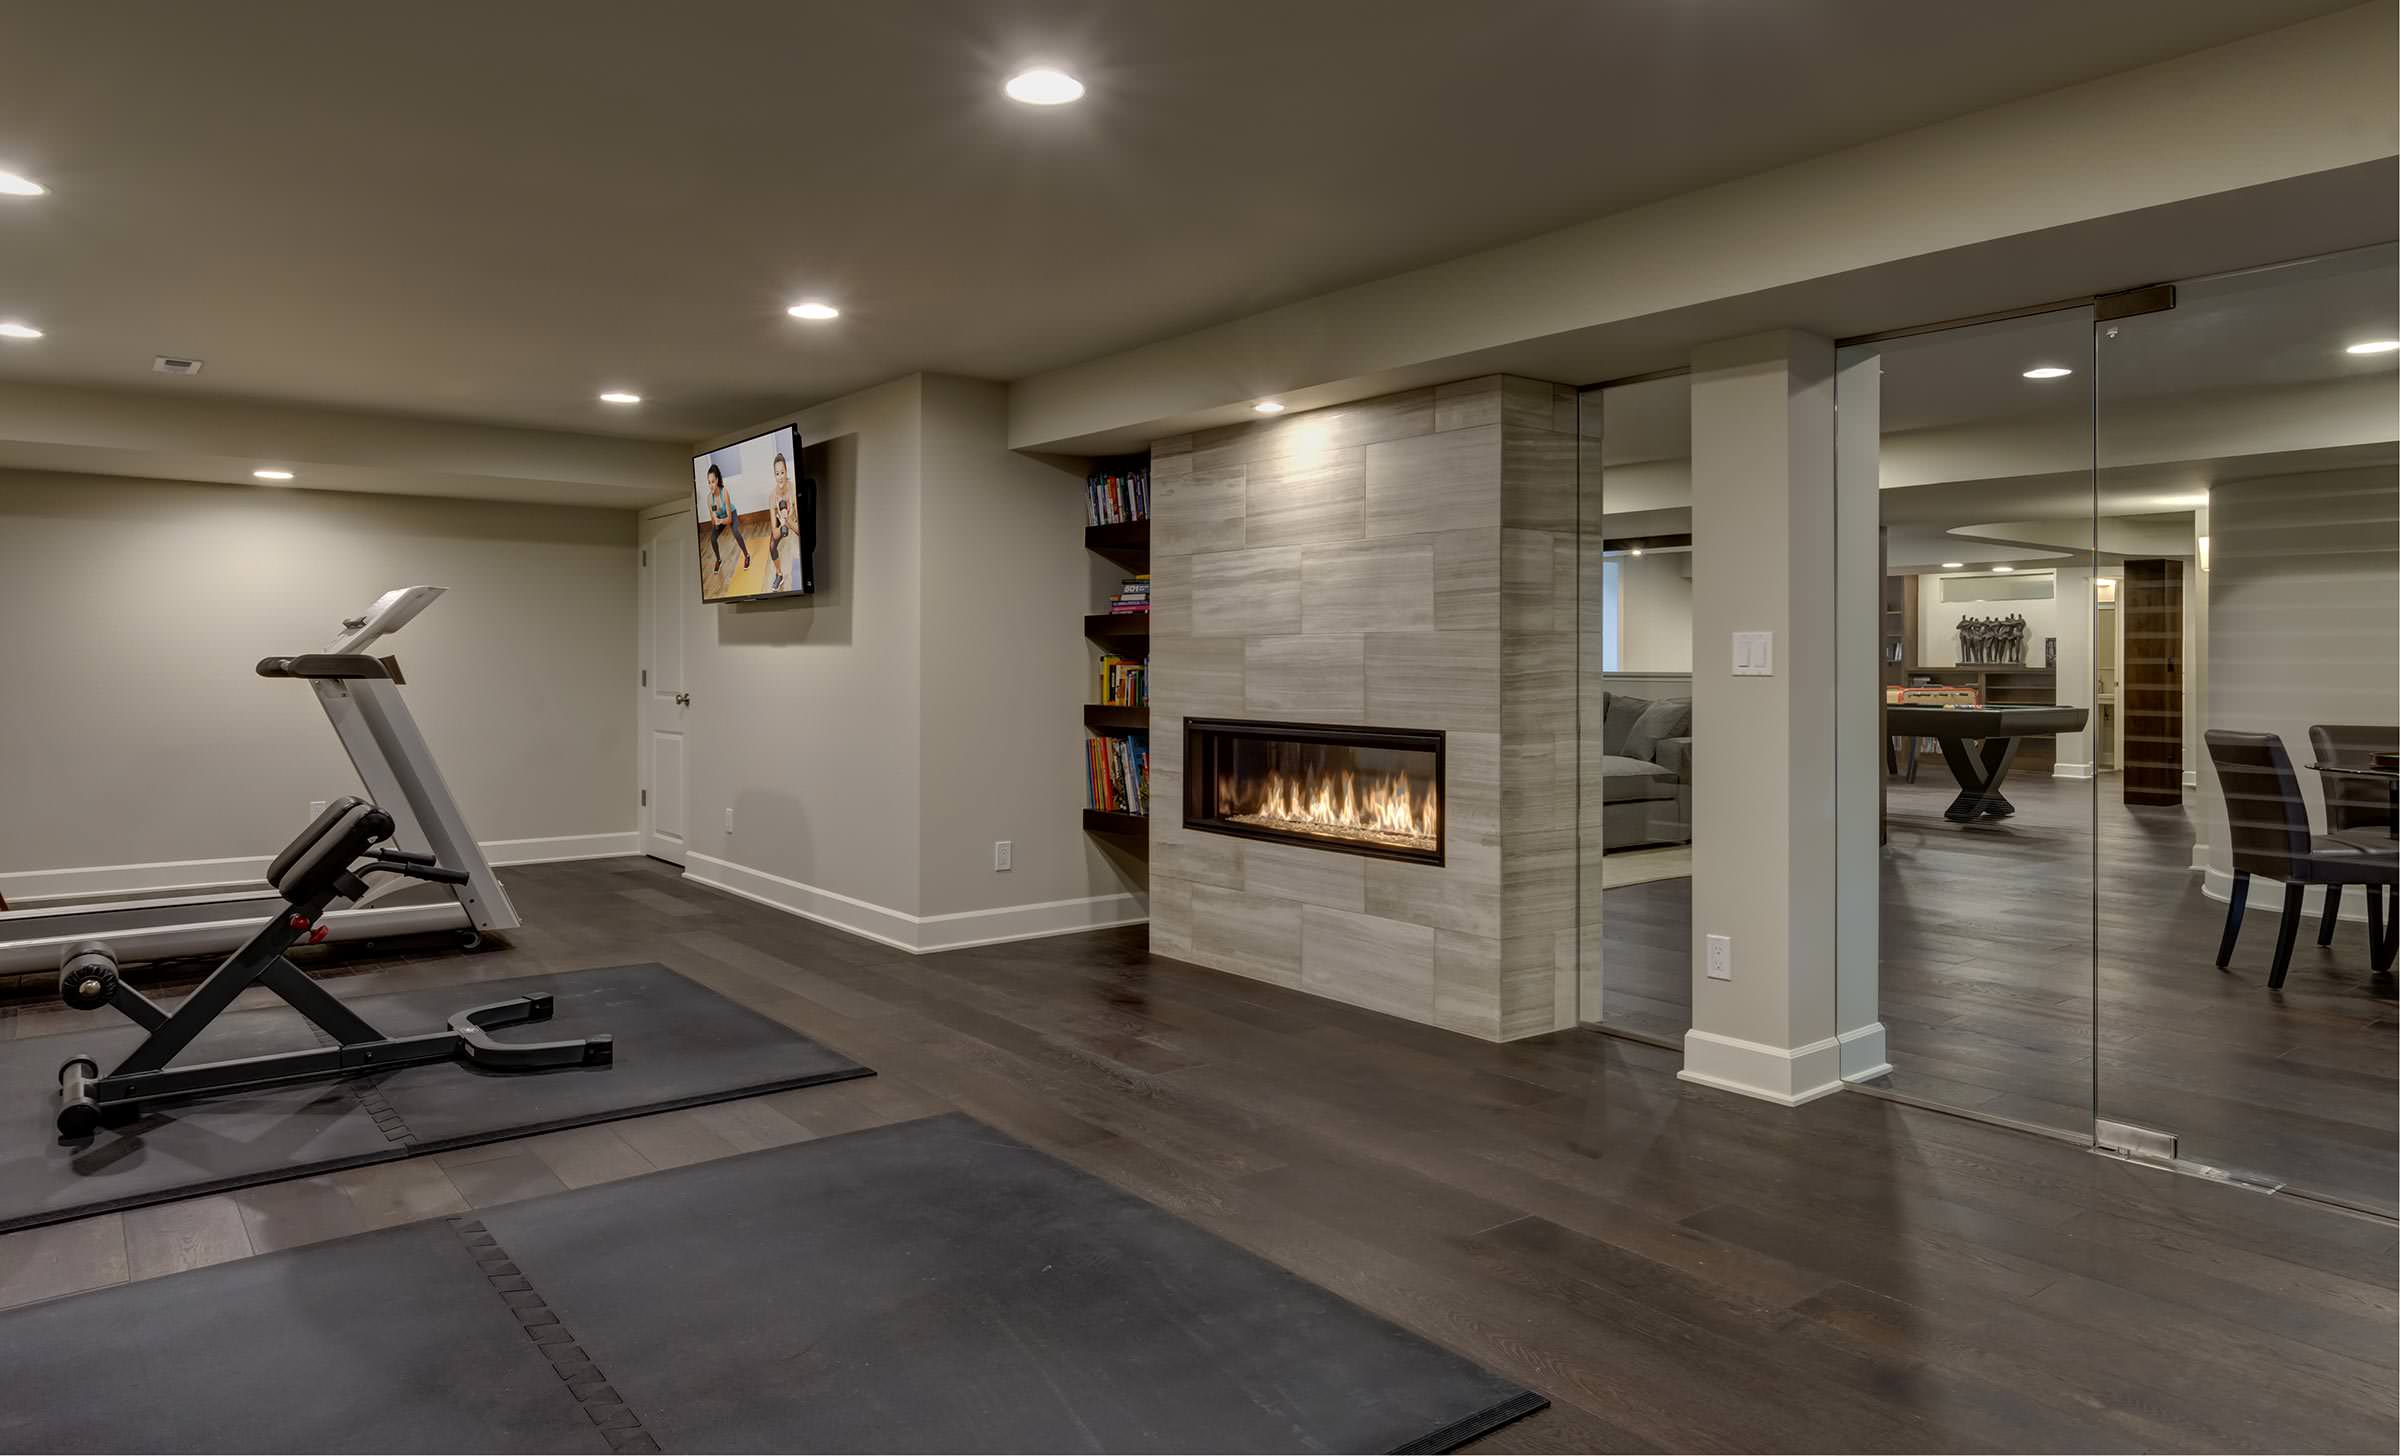 75 Beautiful All Fireplaces Basement Pictures Ideas July 2021 Houzz